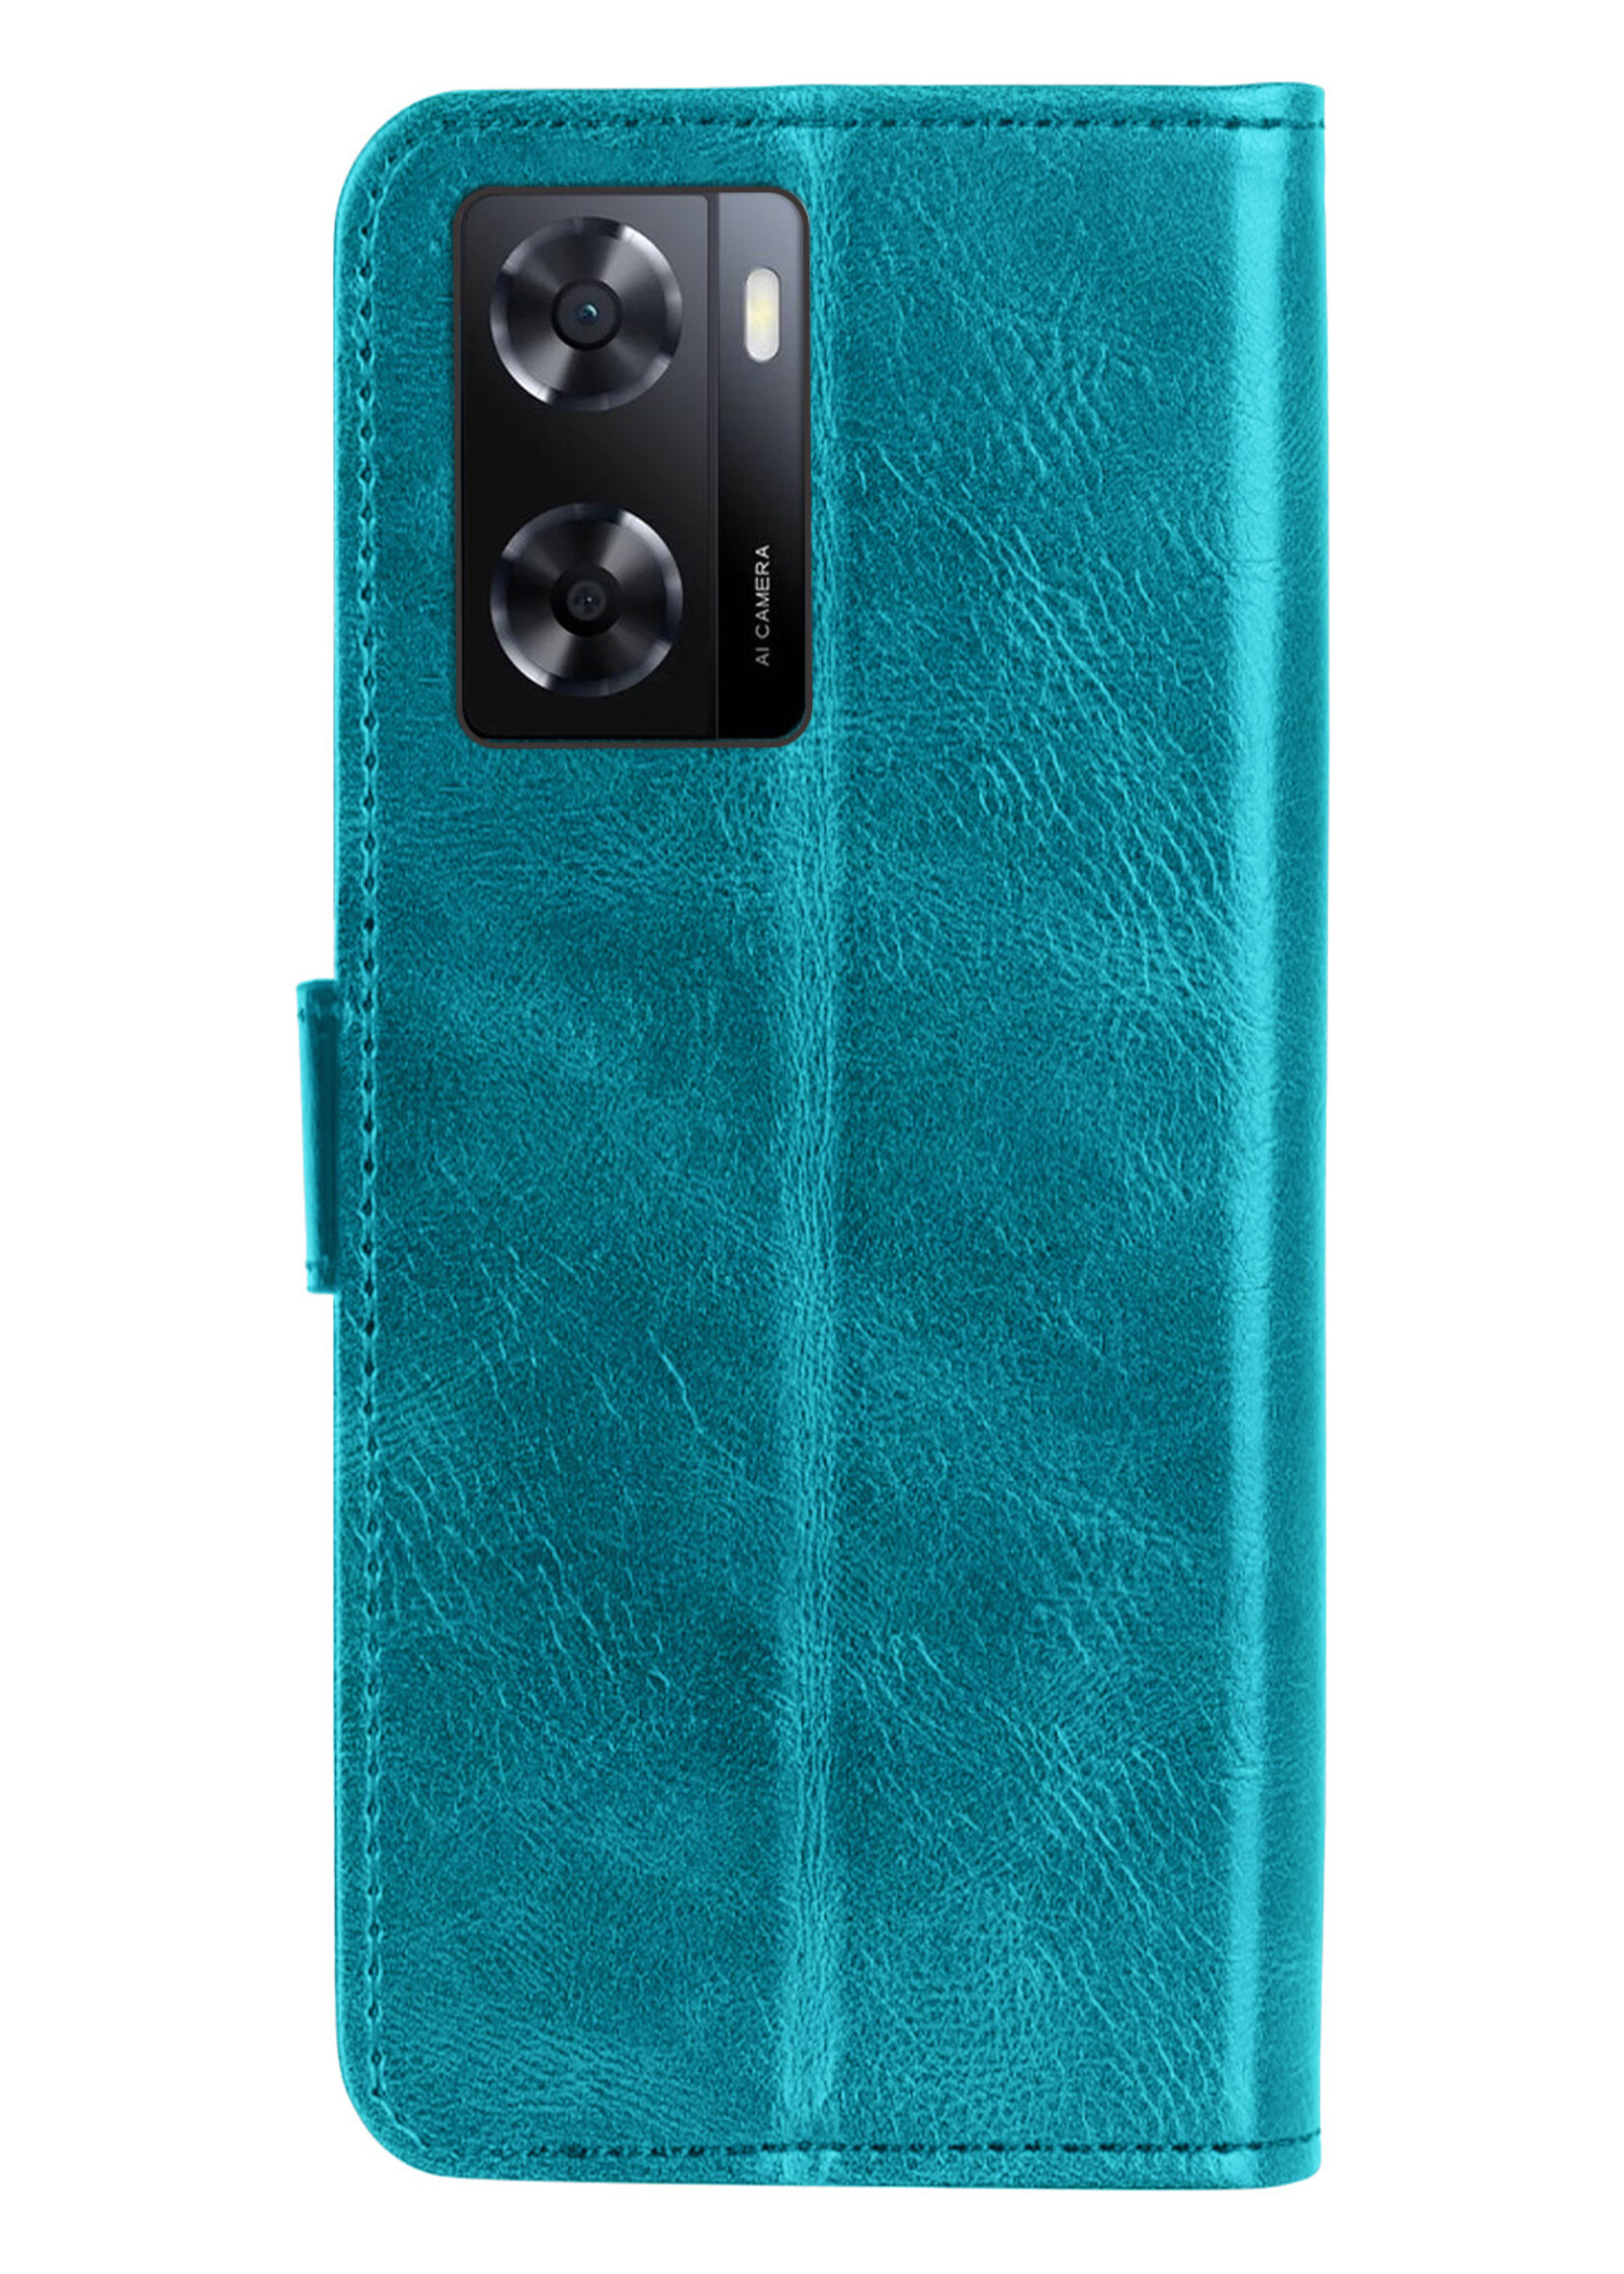 BTH OPPO A57 Hoesje Book Case Hoes Portemonnee Cover Walletcase - OPPO A57 Hoes Bookcase Hoesje - Turquoise